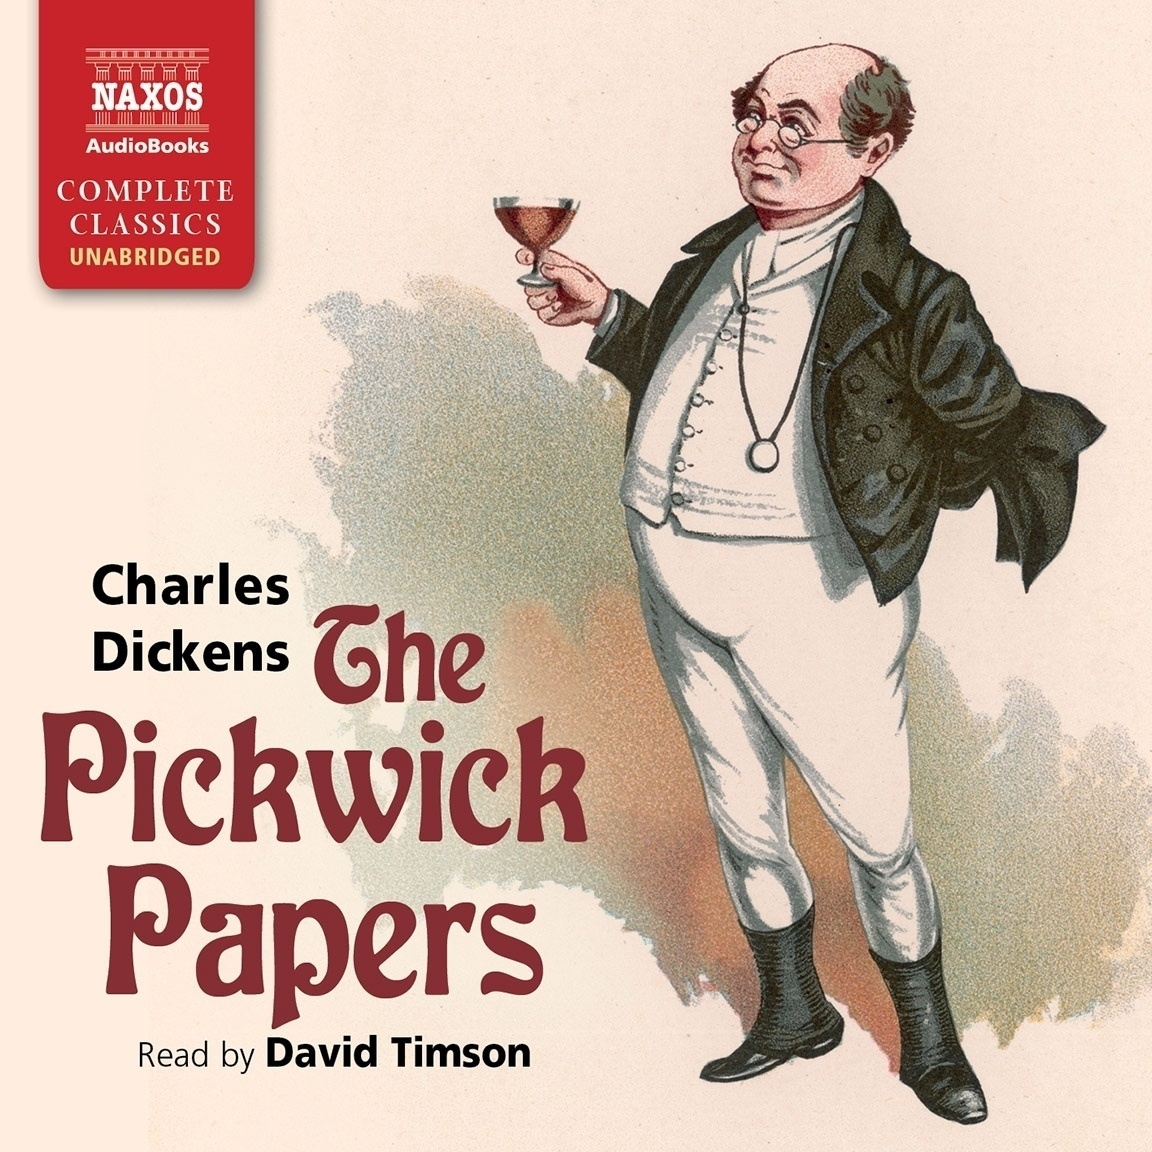 Pickwick papers audiobook cover